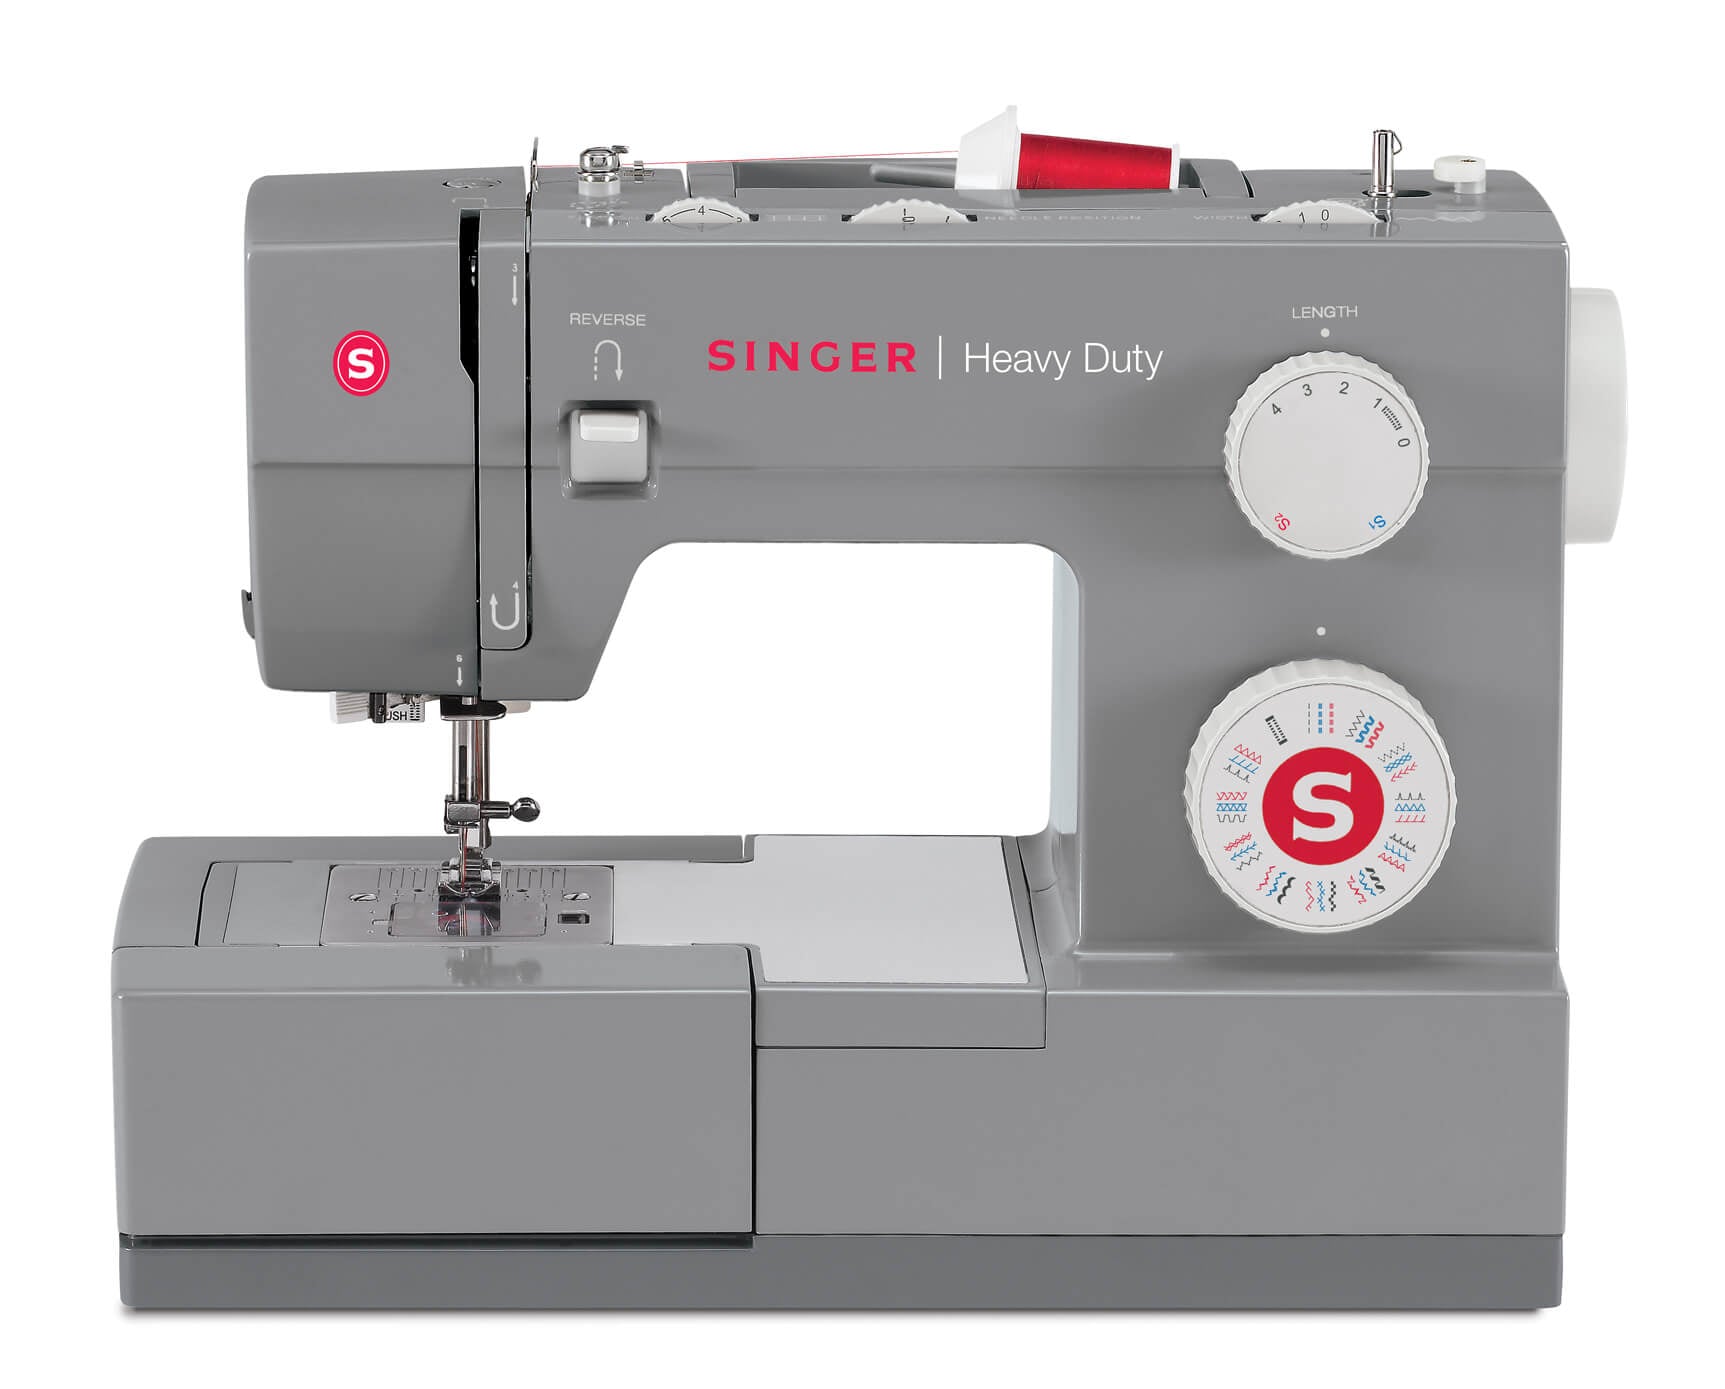 Singer Heavy Duty 4432 Sewing Machine - top spec, 60% stronger and over 30% faster, 32 stitch patterns, overlocking and stretch stitch - free upgrade to include Denim Sewing Accessories